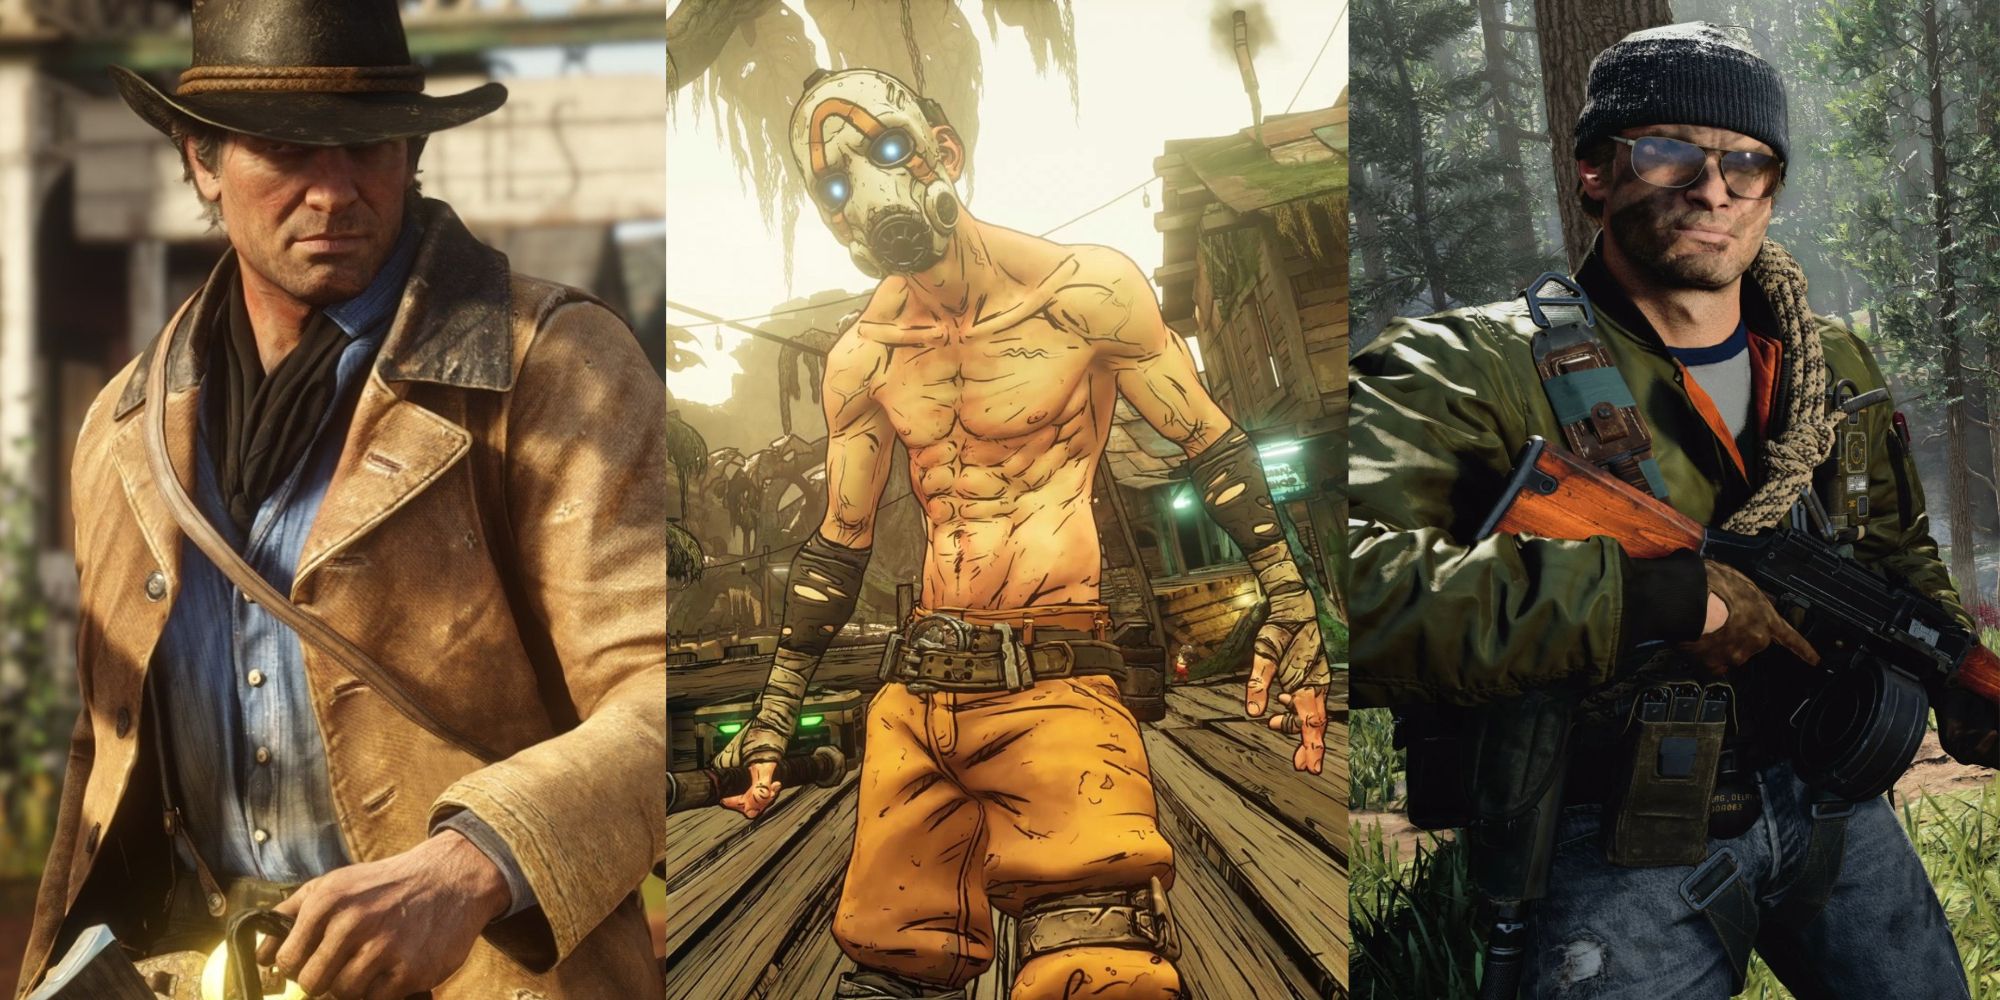 Characters from Red Dead Redemption 2, Borderlands 3, and Call of Duty Black Ops Cold War. First one is wearing a cowboy hat, second one is shirtless with a mask on, third one is holding a gun and wearing glasses